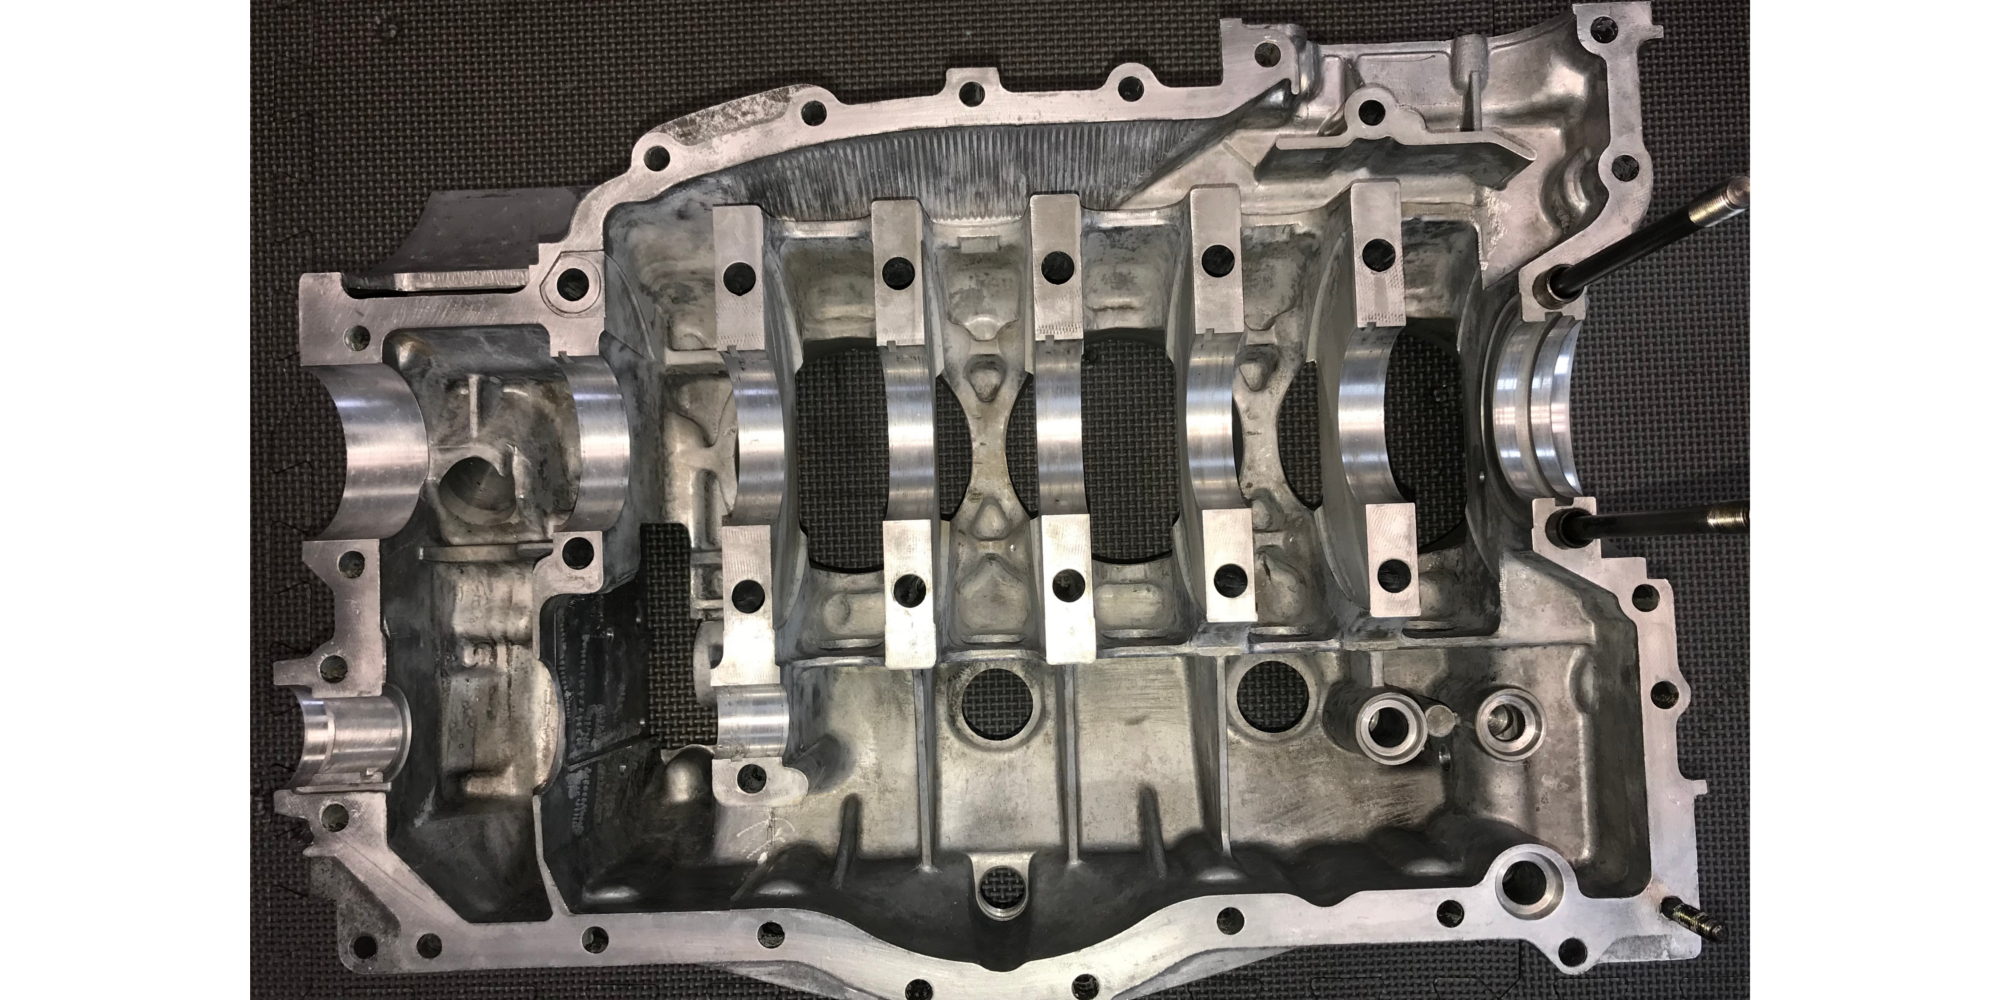 After - Aluminum Engine Case Cleaning